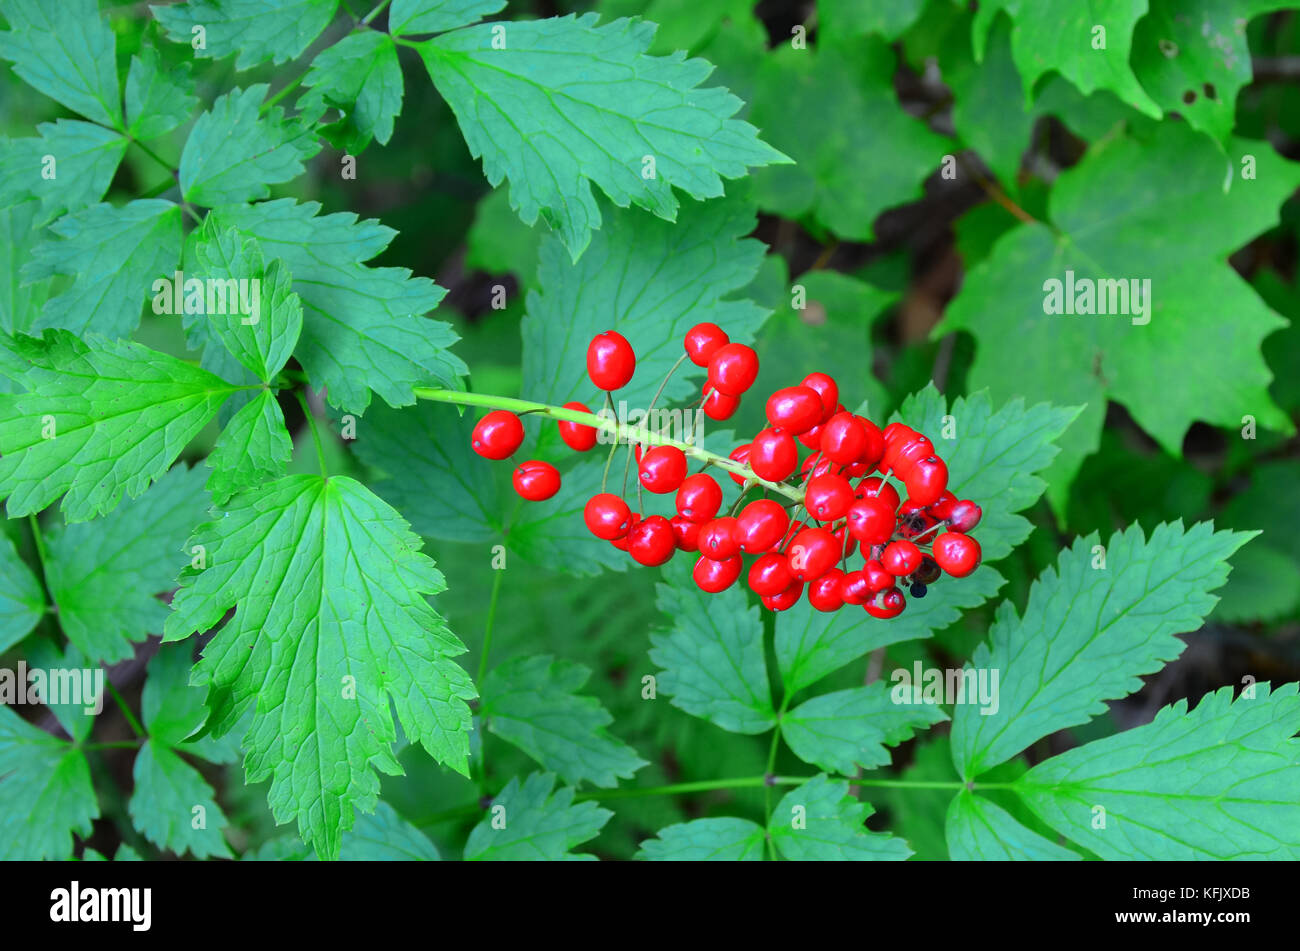 The bright red fruit of the poisonous red baneberry (Actaea rubra) growing in the Adirondack Mountains.. Stock Photo